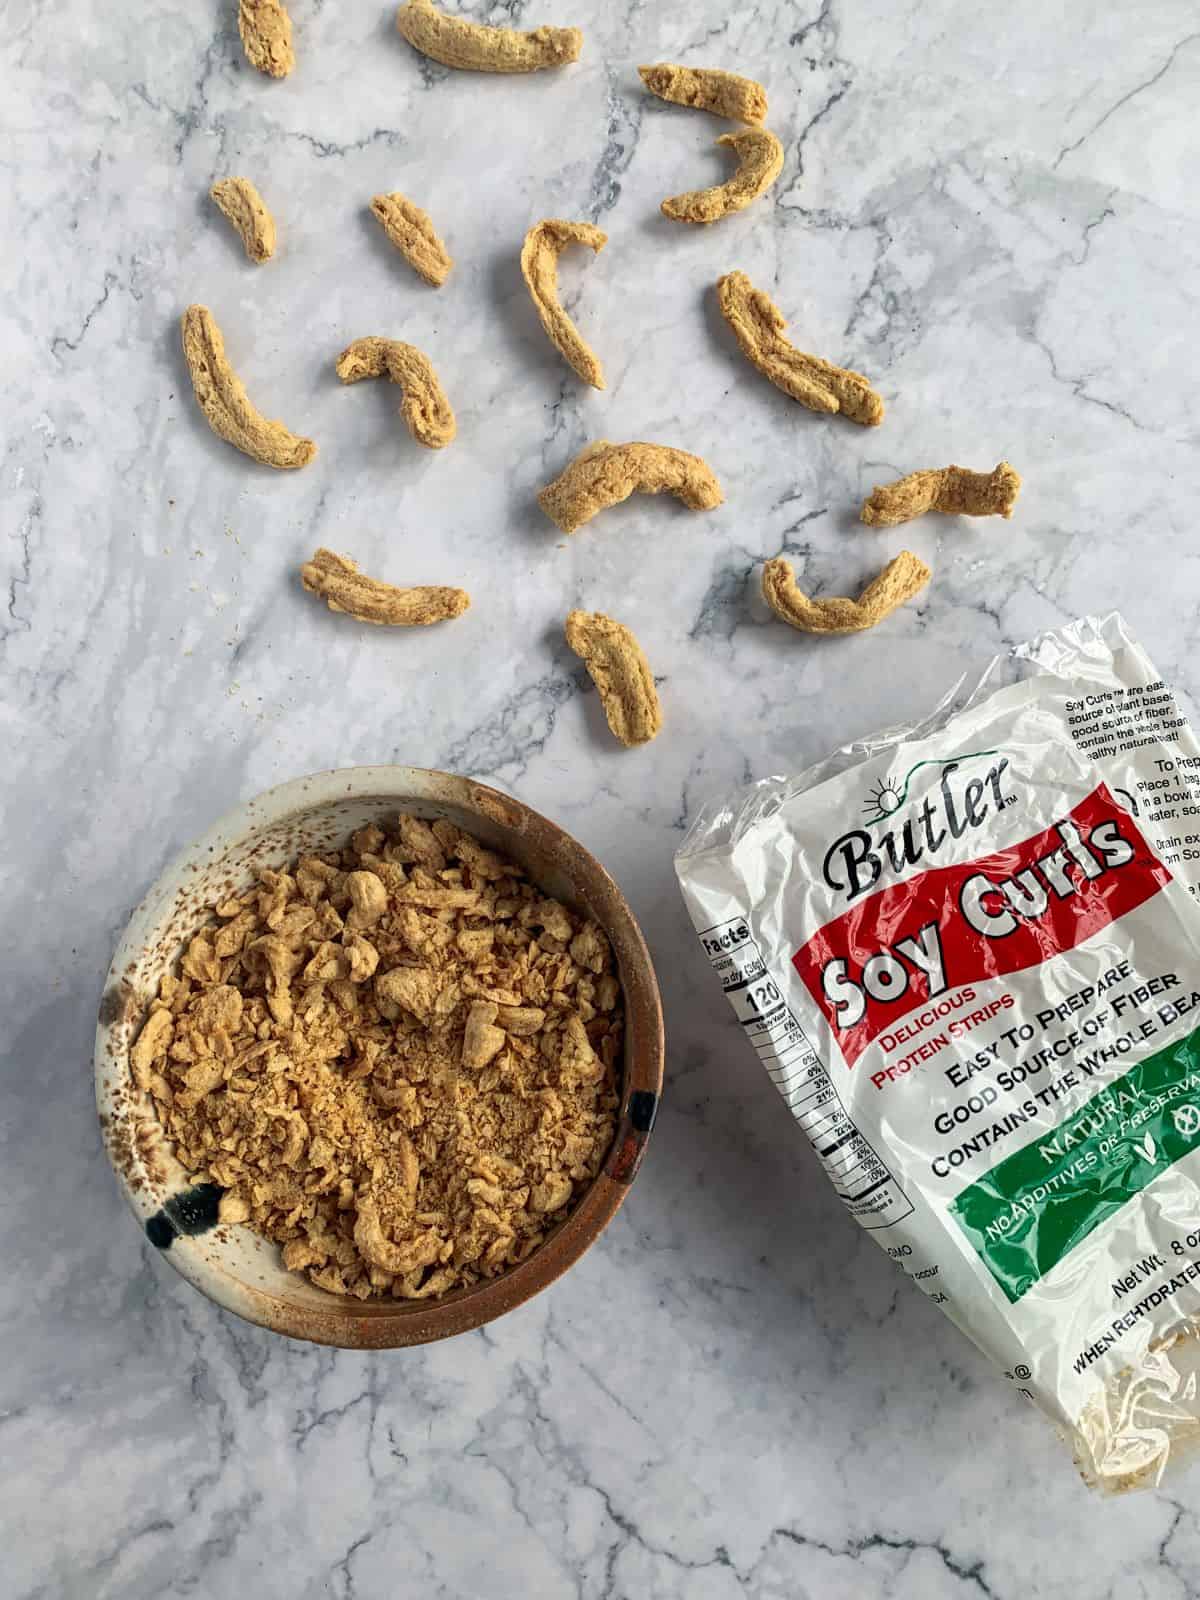 Soy curls whole and crumbled on a white surface with a Butler's Soy Curl bag.